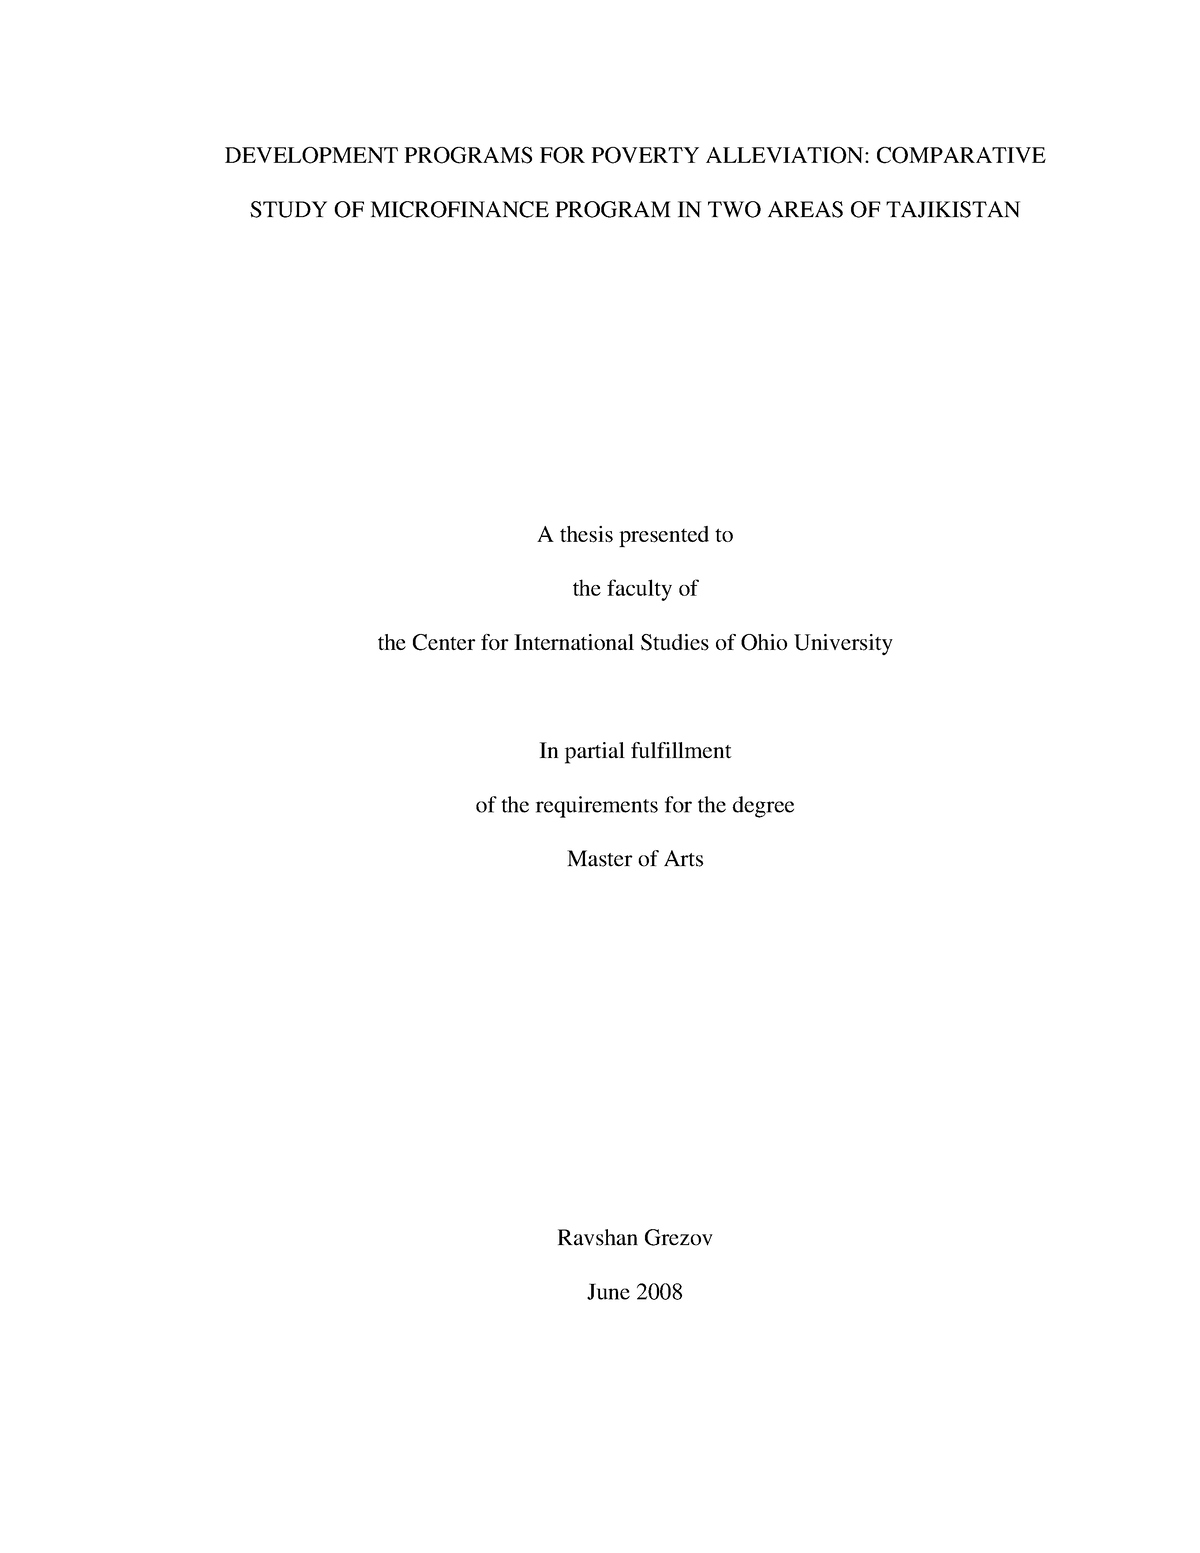 phd thesis on poverty alleviation